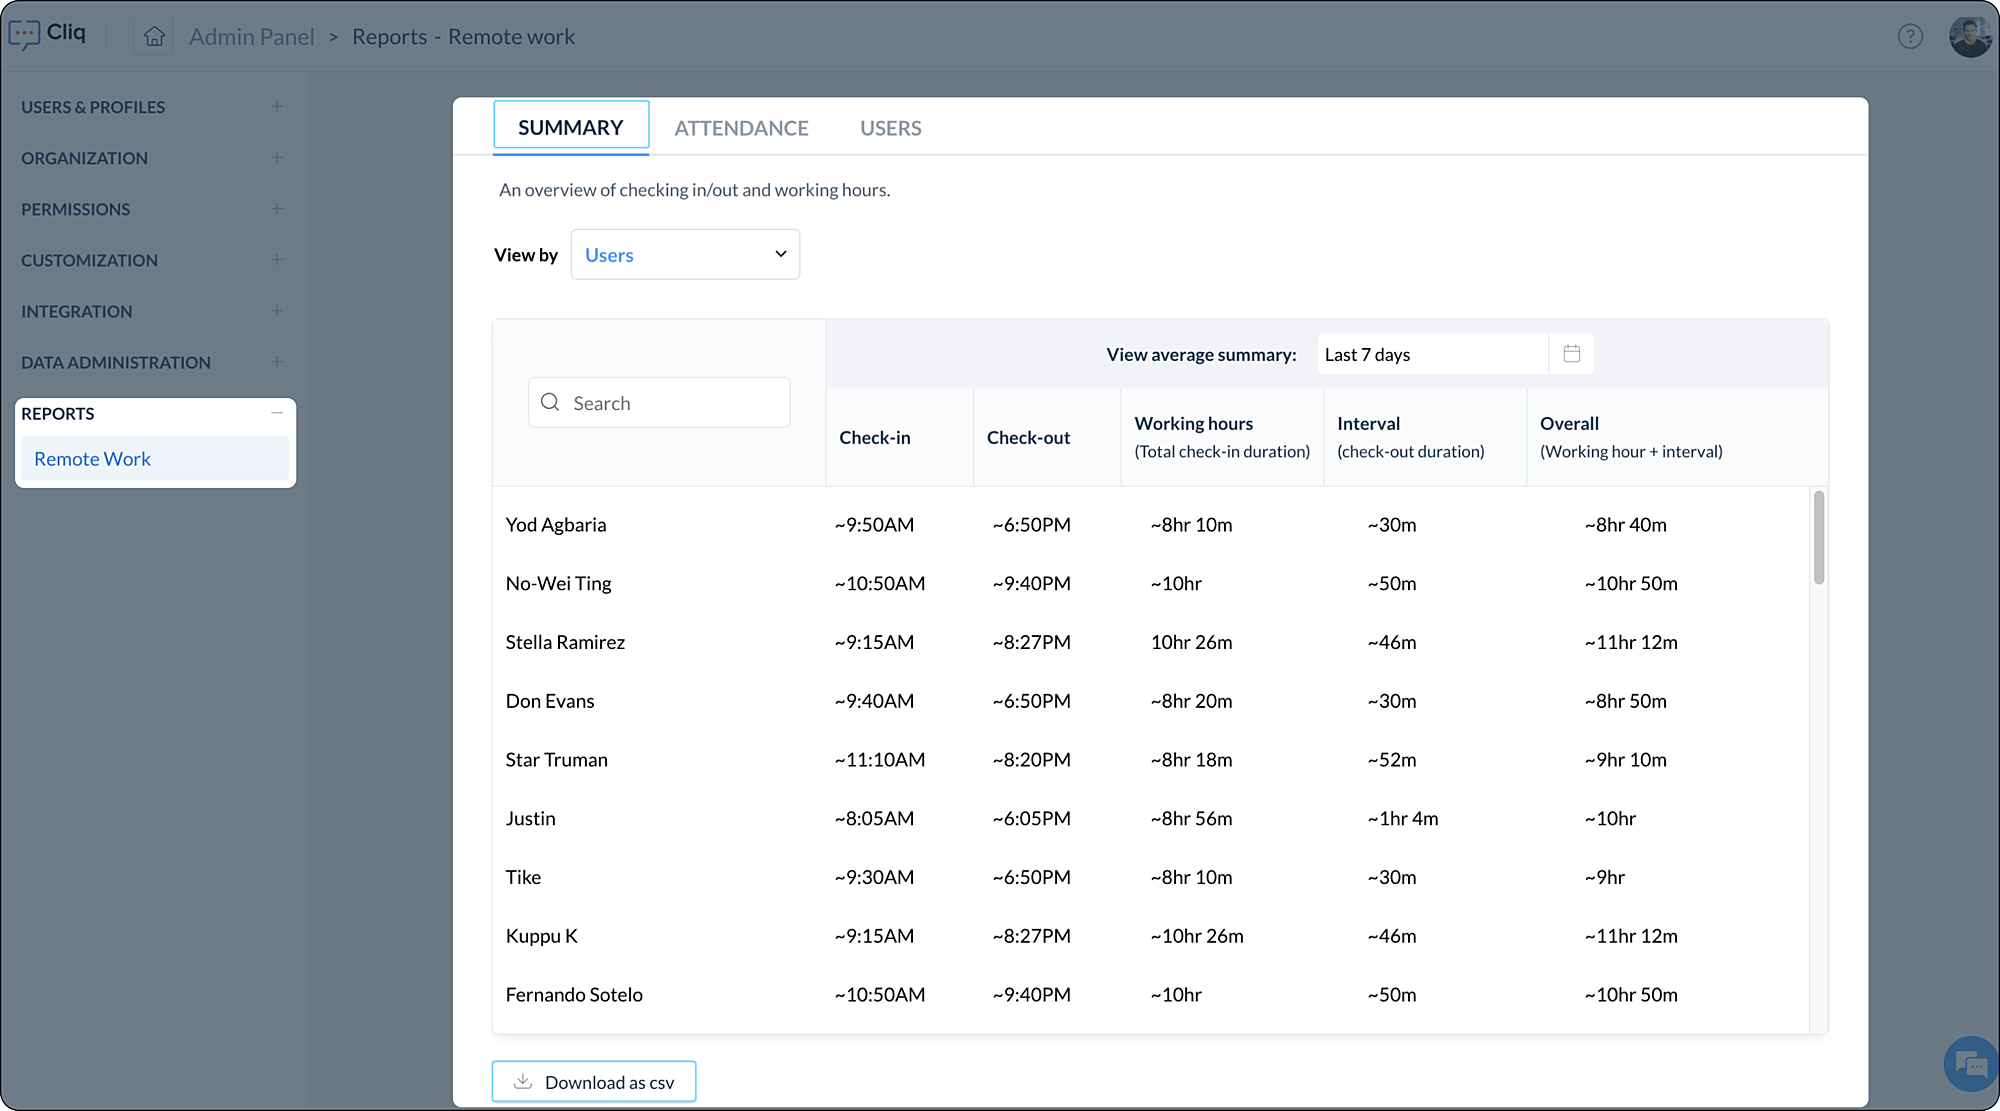 View remote work reports